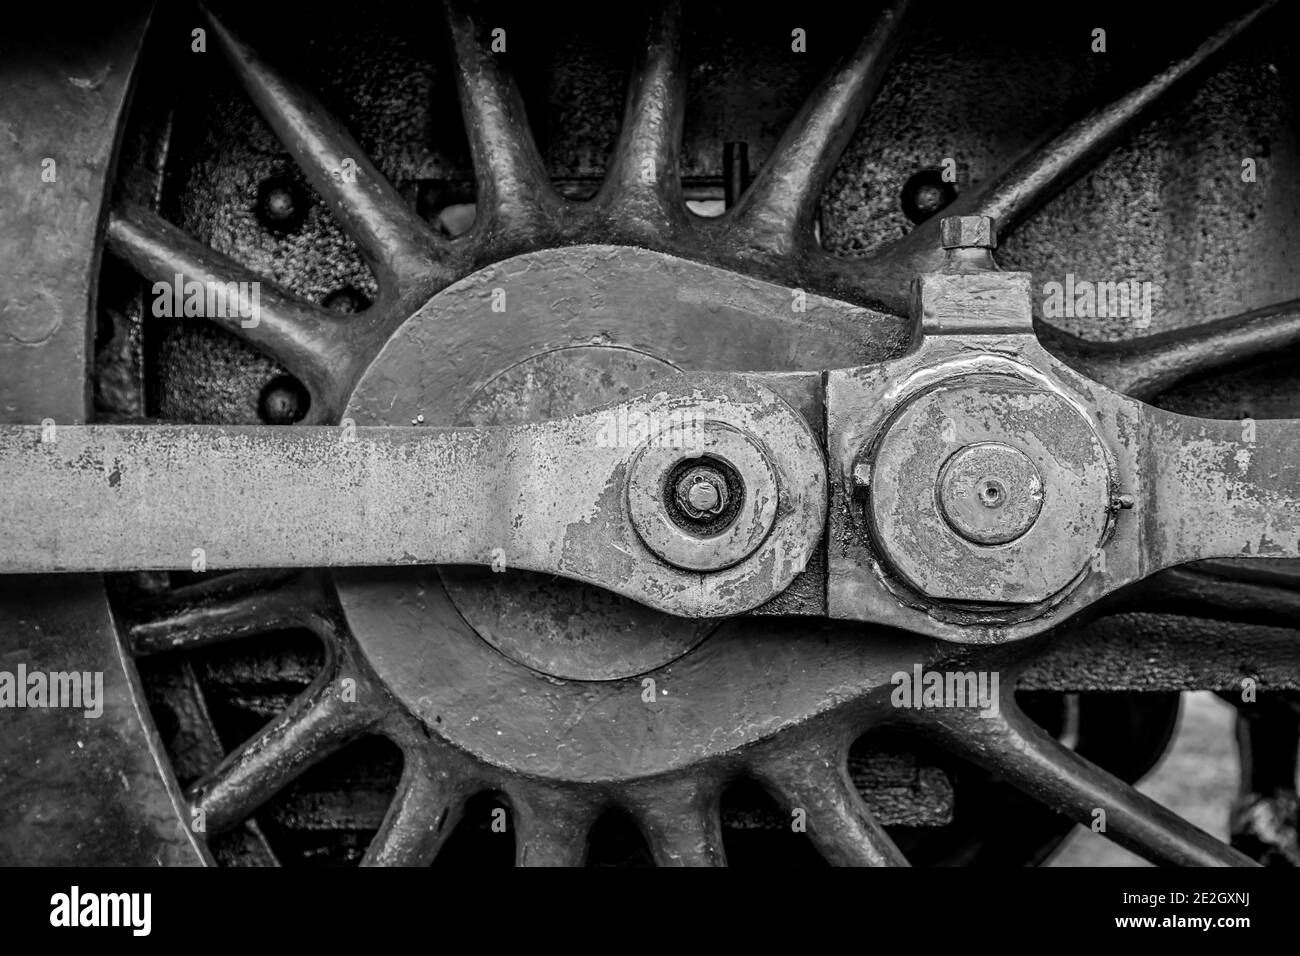 Steam Locomotive Wheel and Connecting Rod Stock Photo